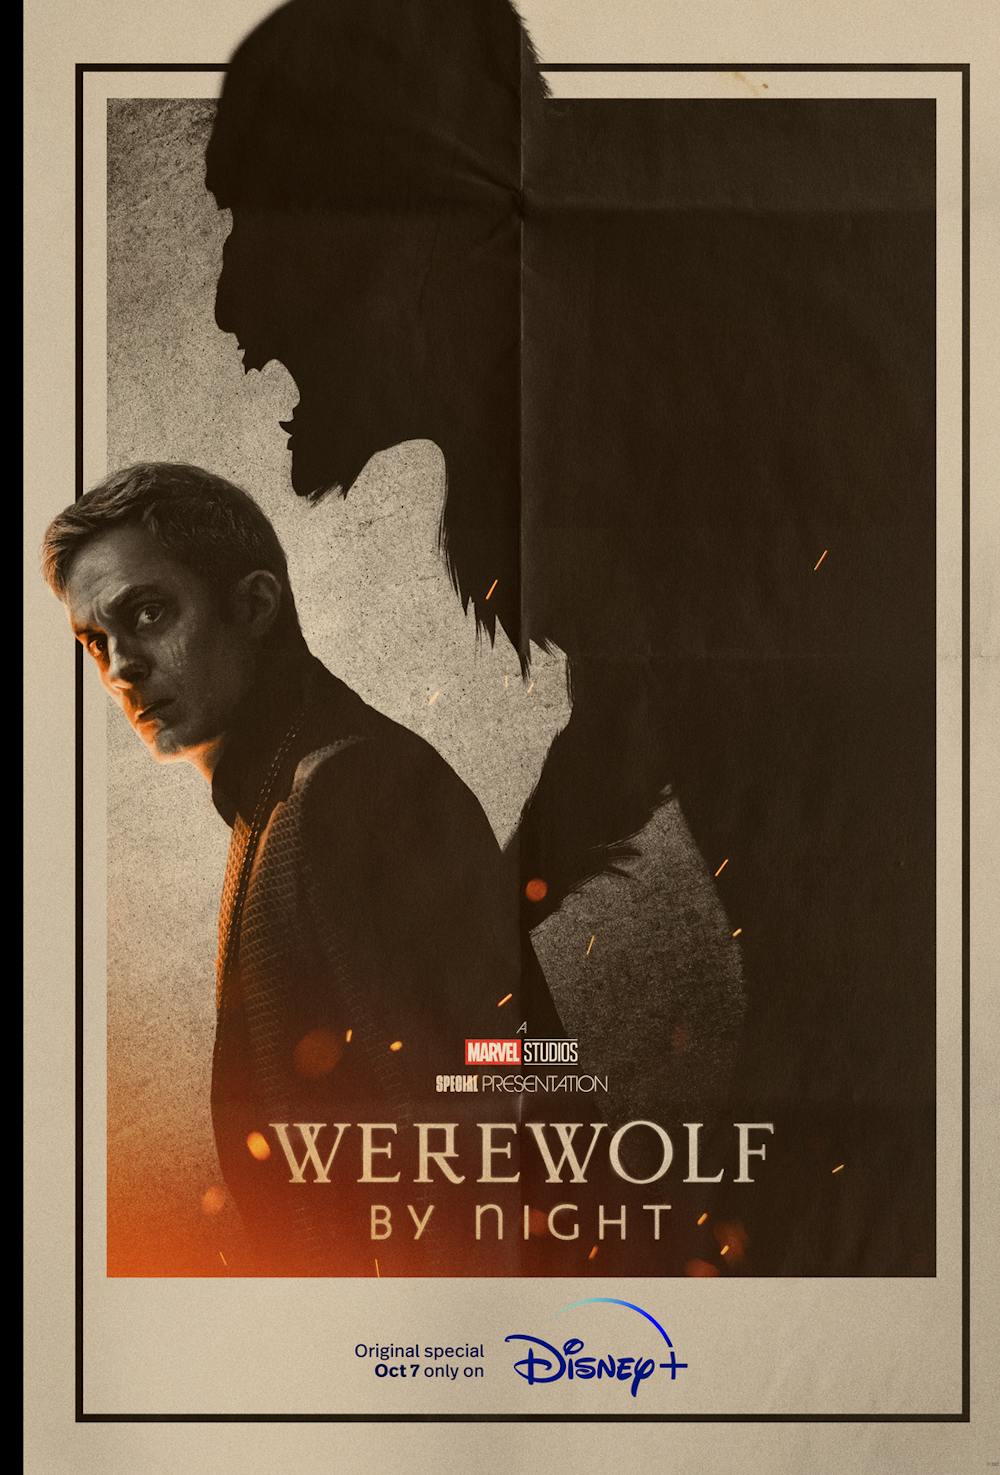 Marvel’s release of ‘Werewolf by Night’ sparks hope for the studio’s future